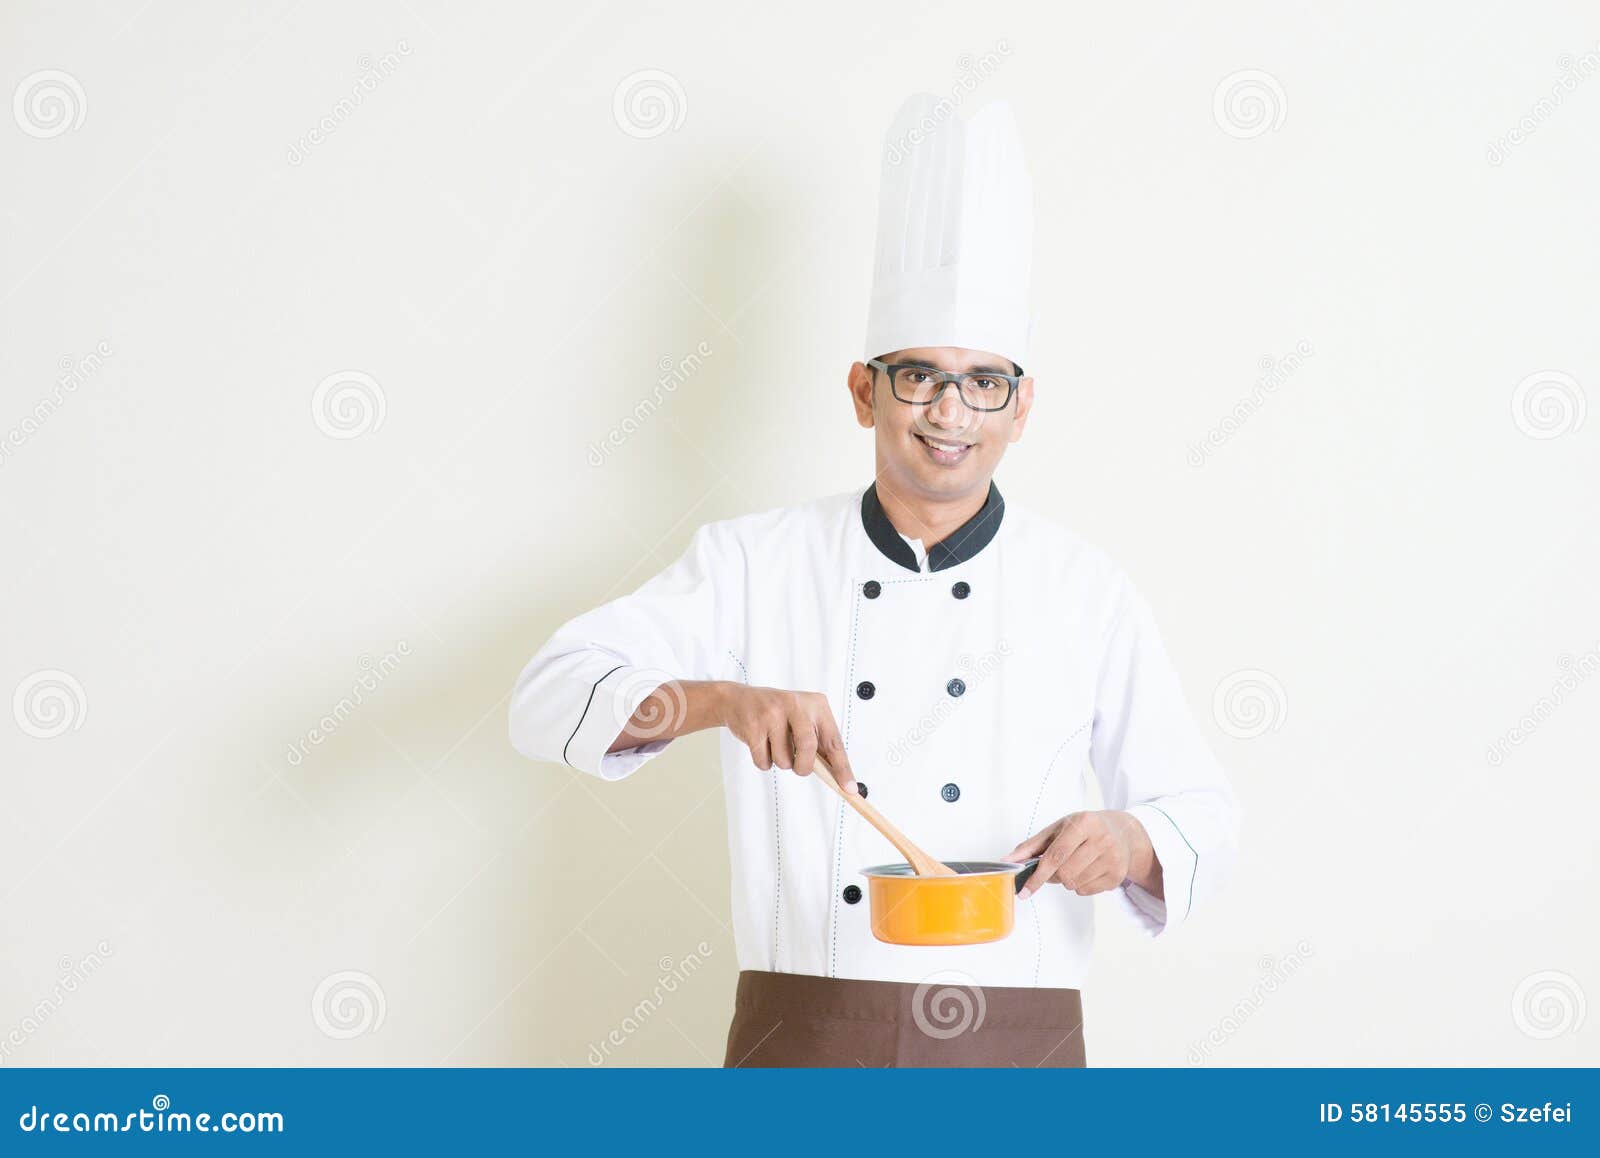 Indian Male Chef In Uniform Cooking Food Stock Image Image Of Occupation Business 58145555 